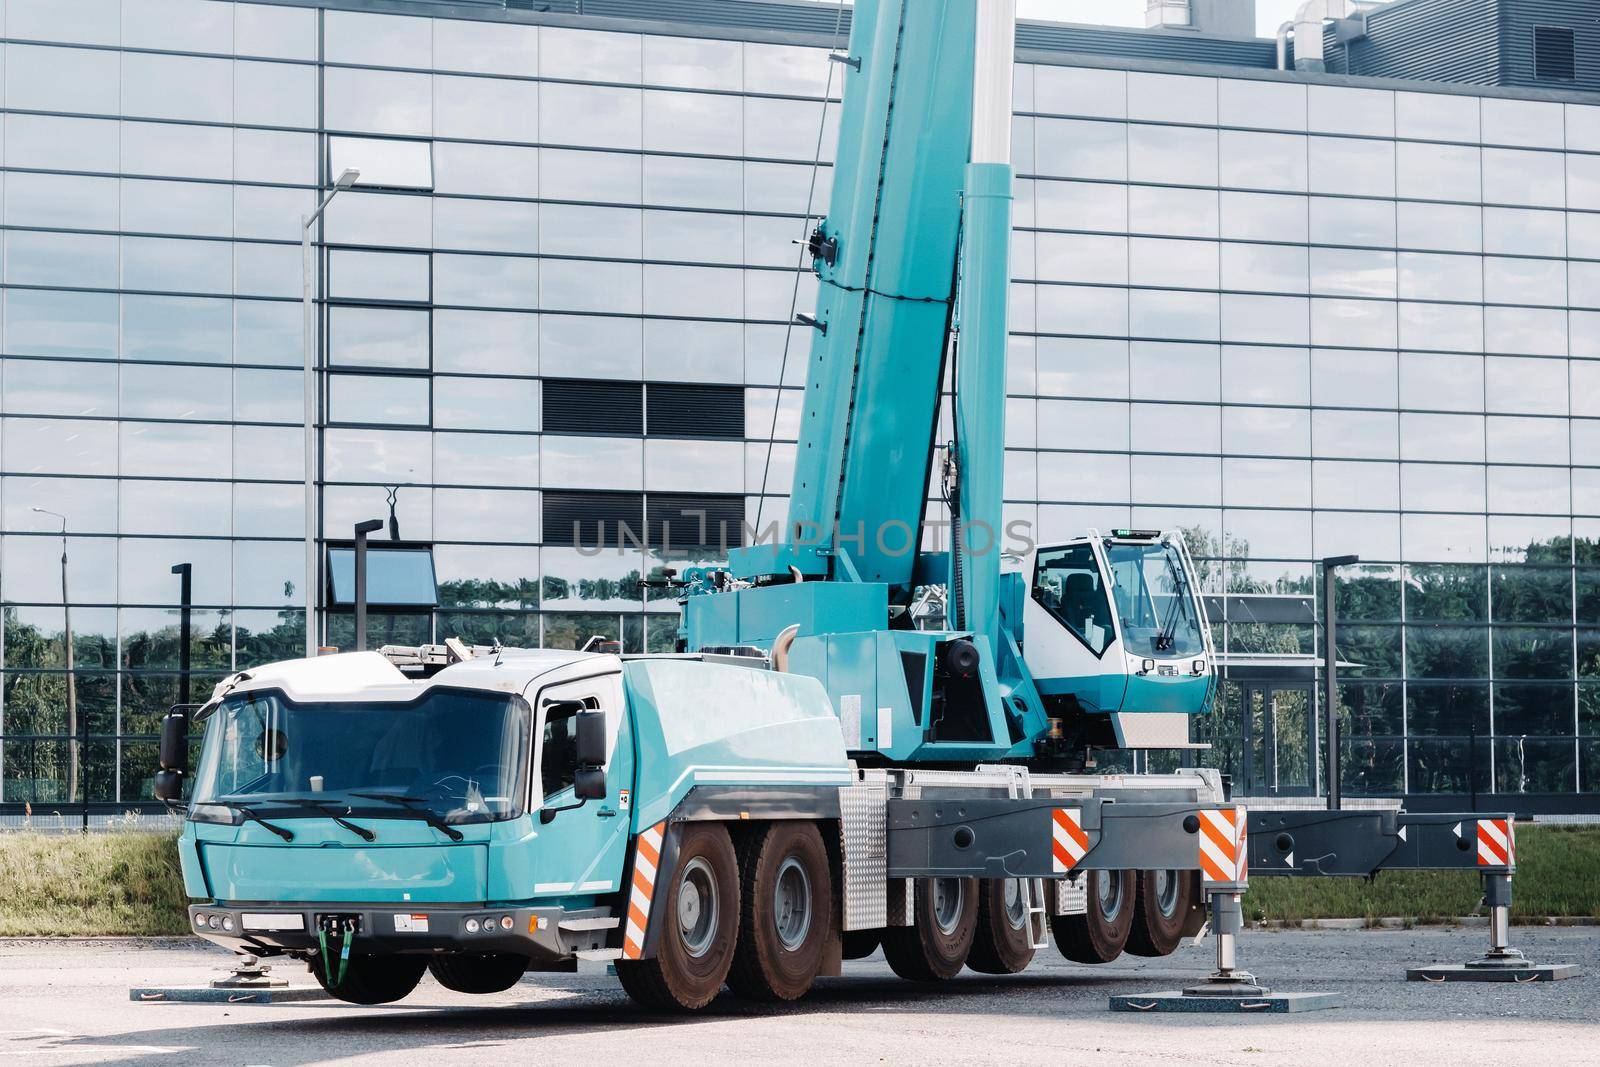 A large blue truck crane stands ready to operate on hydraulic supports on a platform next to a large modern building. The largest truck crane for solving complex tasks